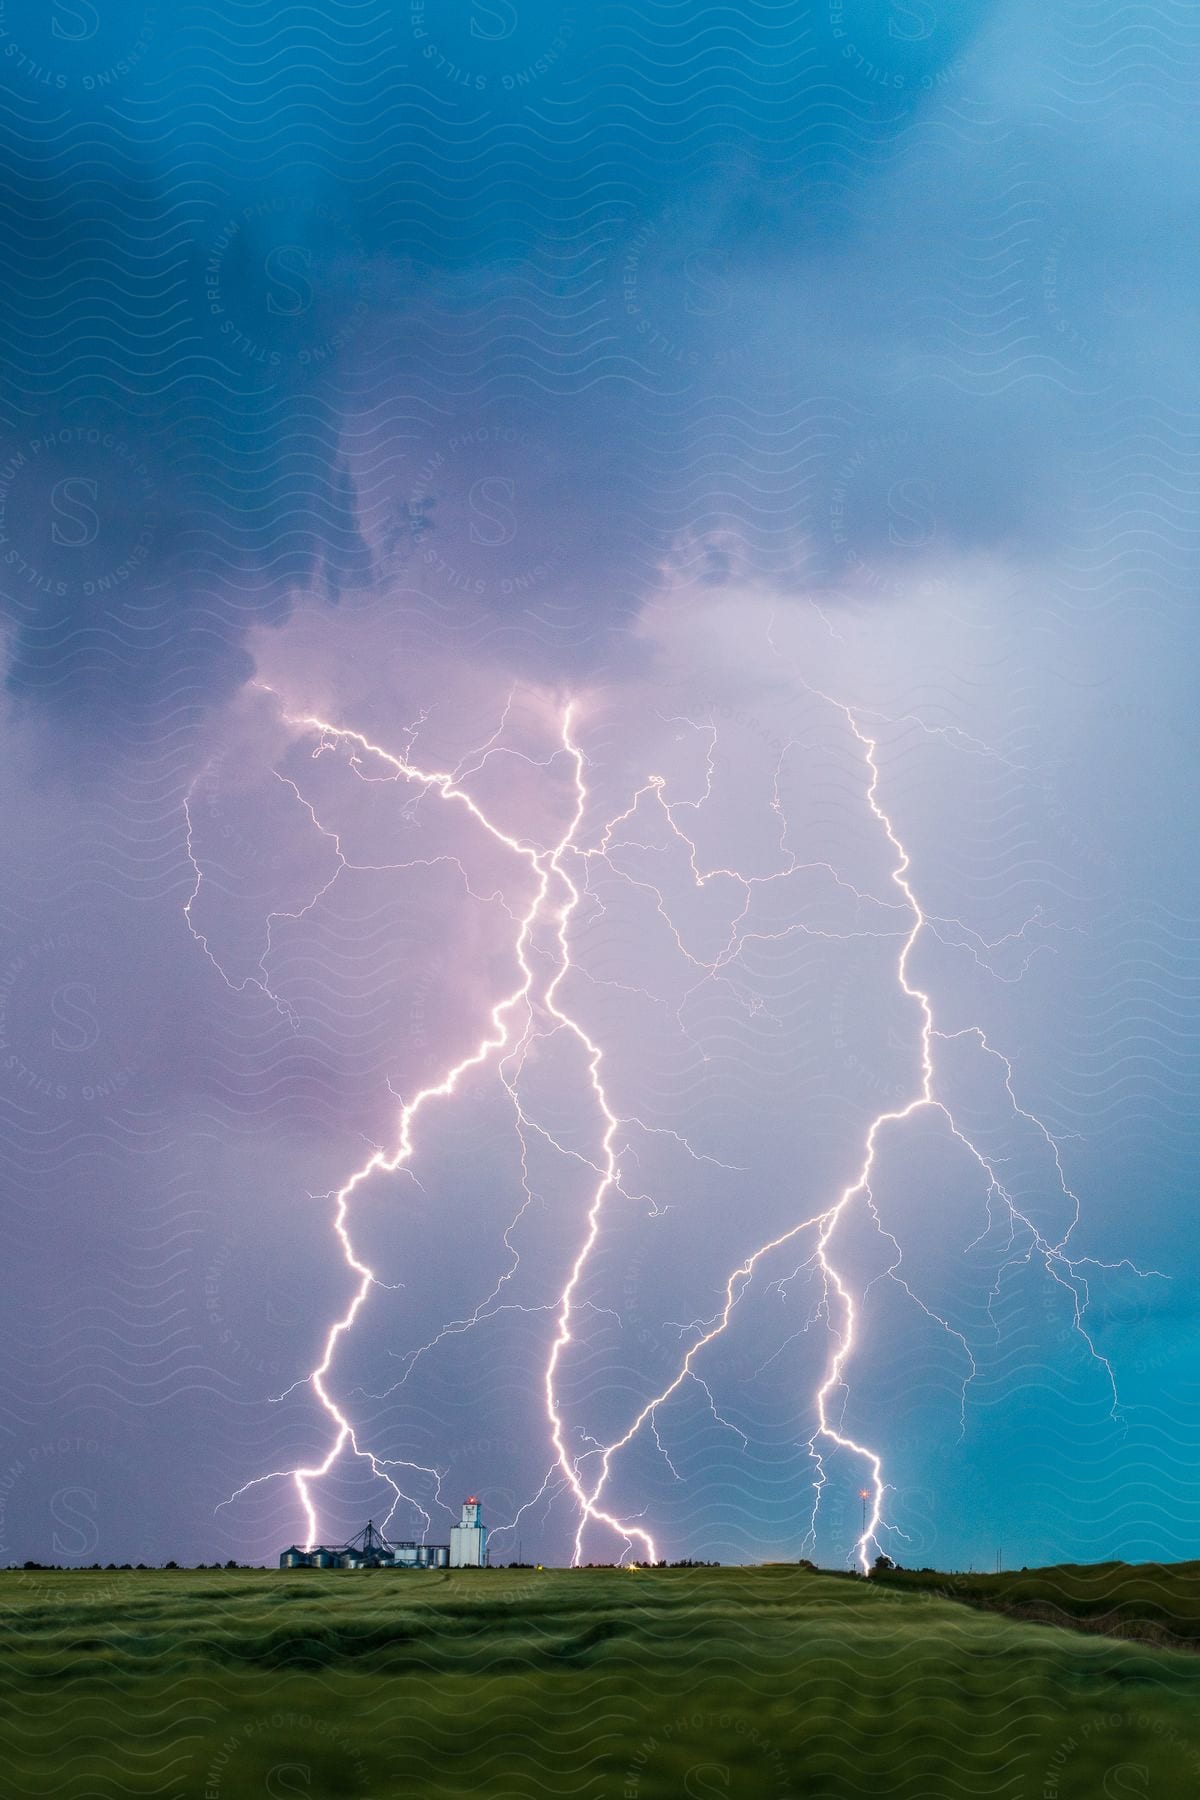 Multiple exposure shot of lightning strikes on a field near silos during the daytime